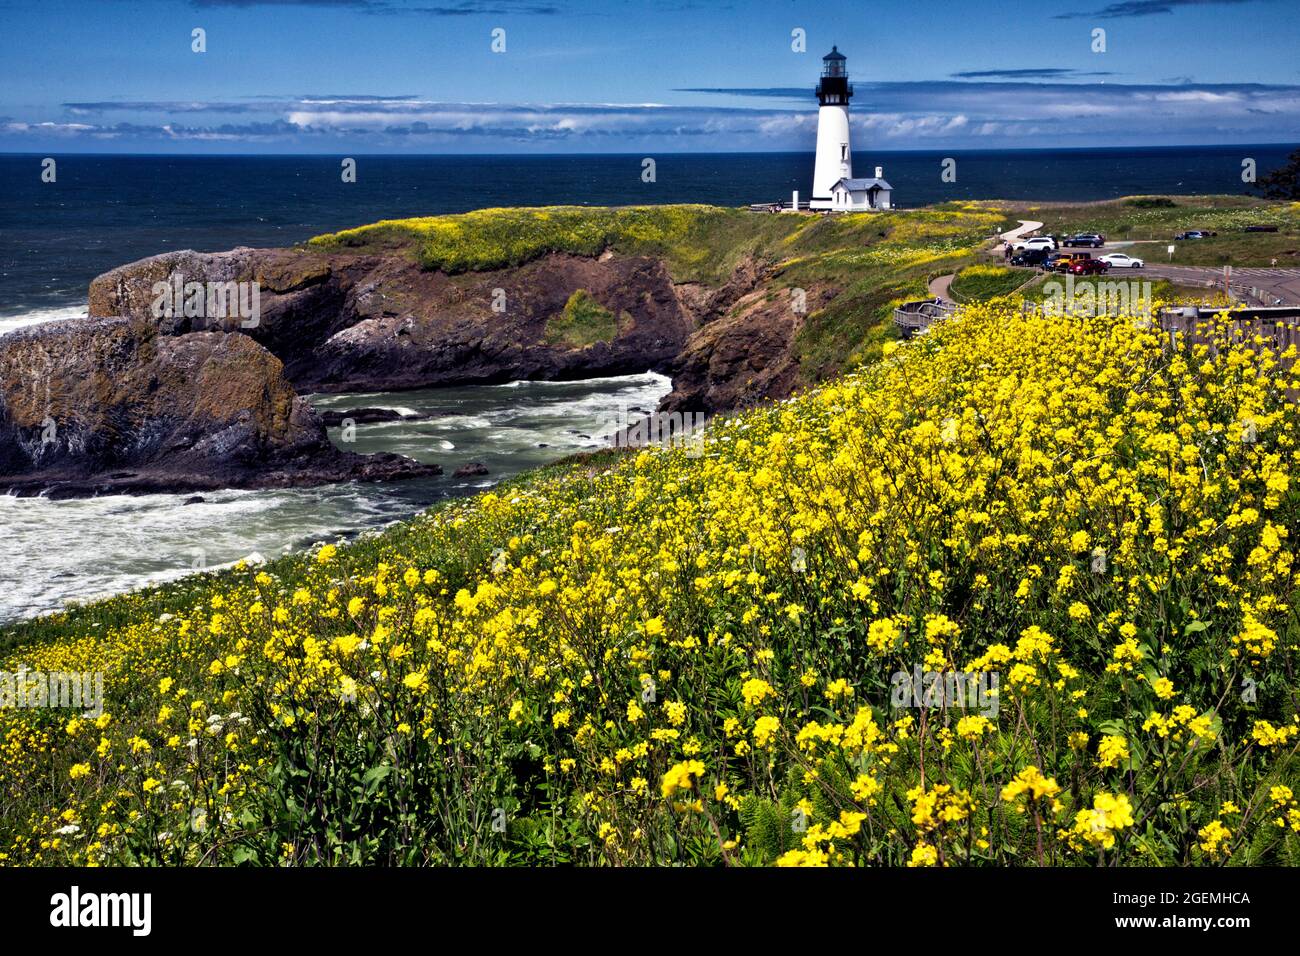 Views of Yaquina Head Lighthouse and beach Stock Photo